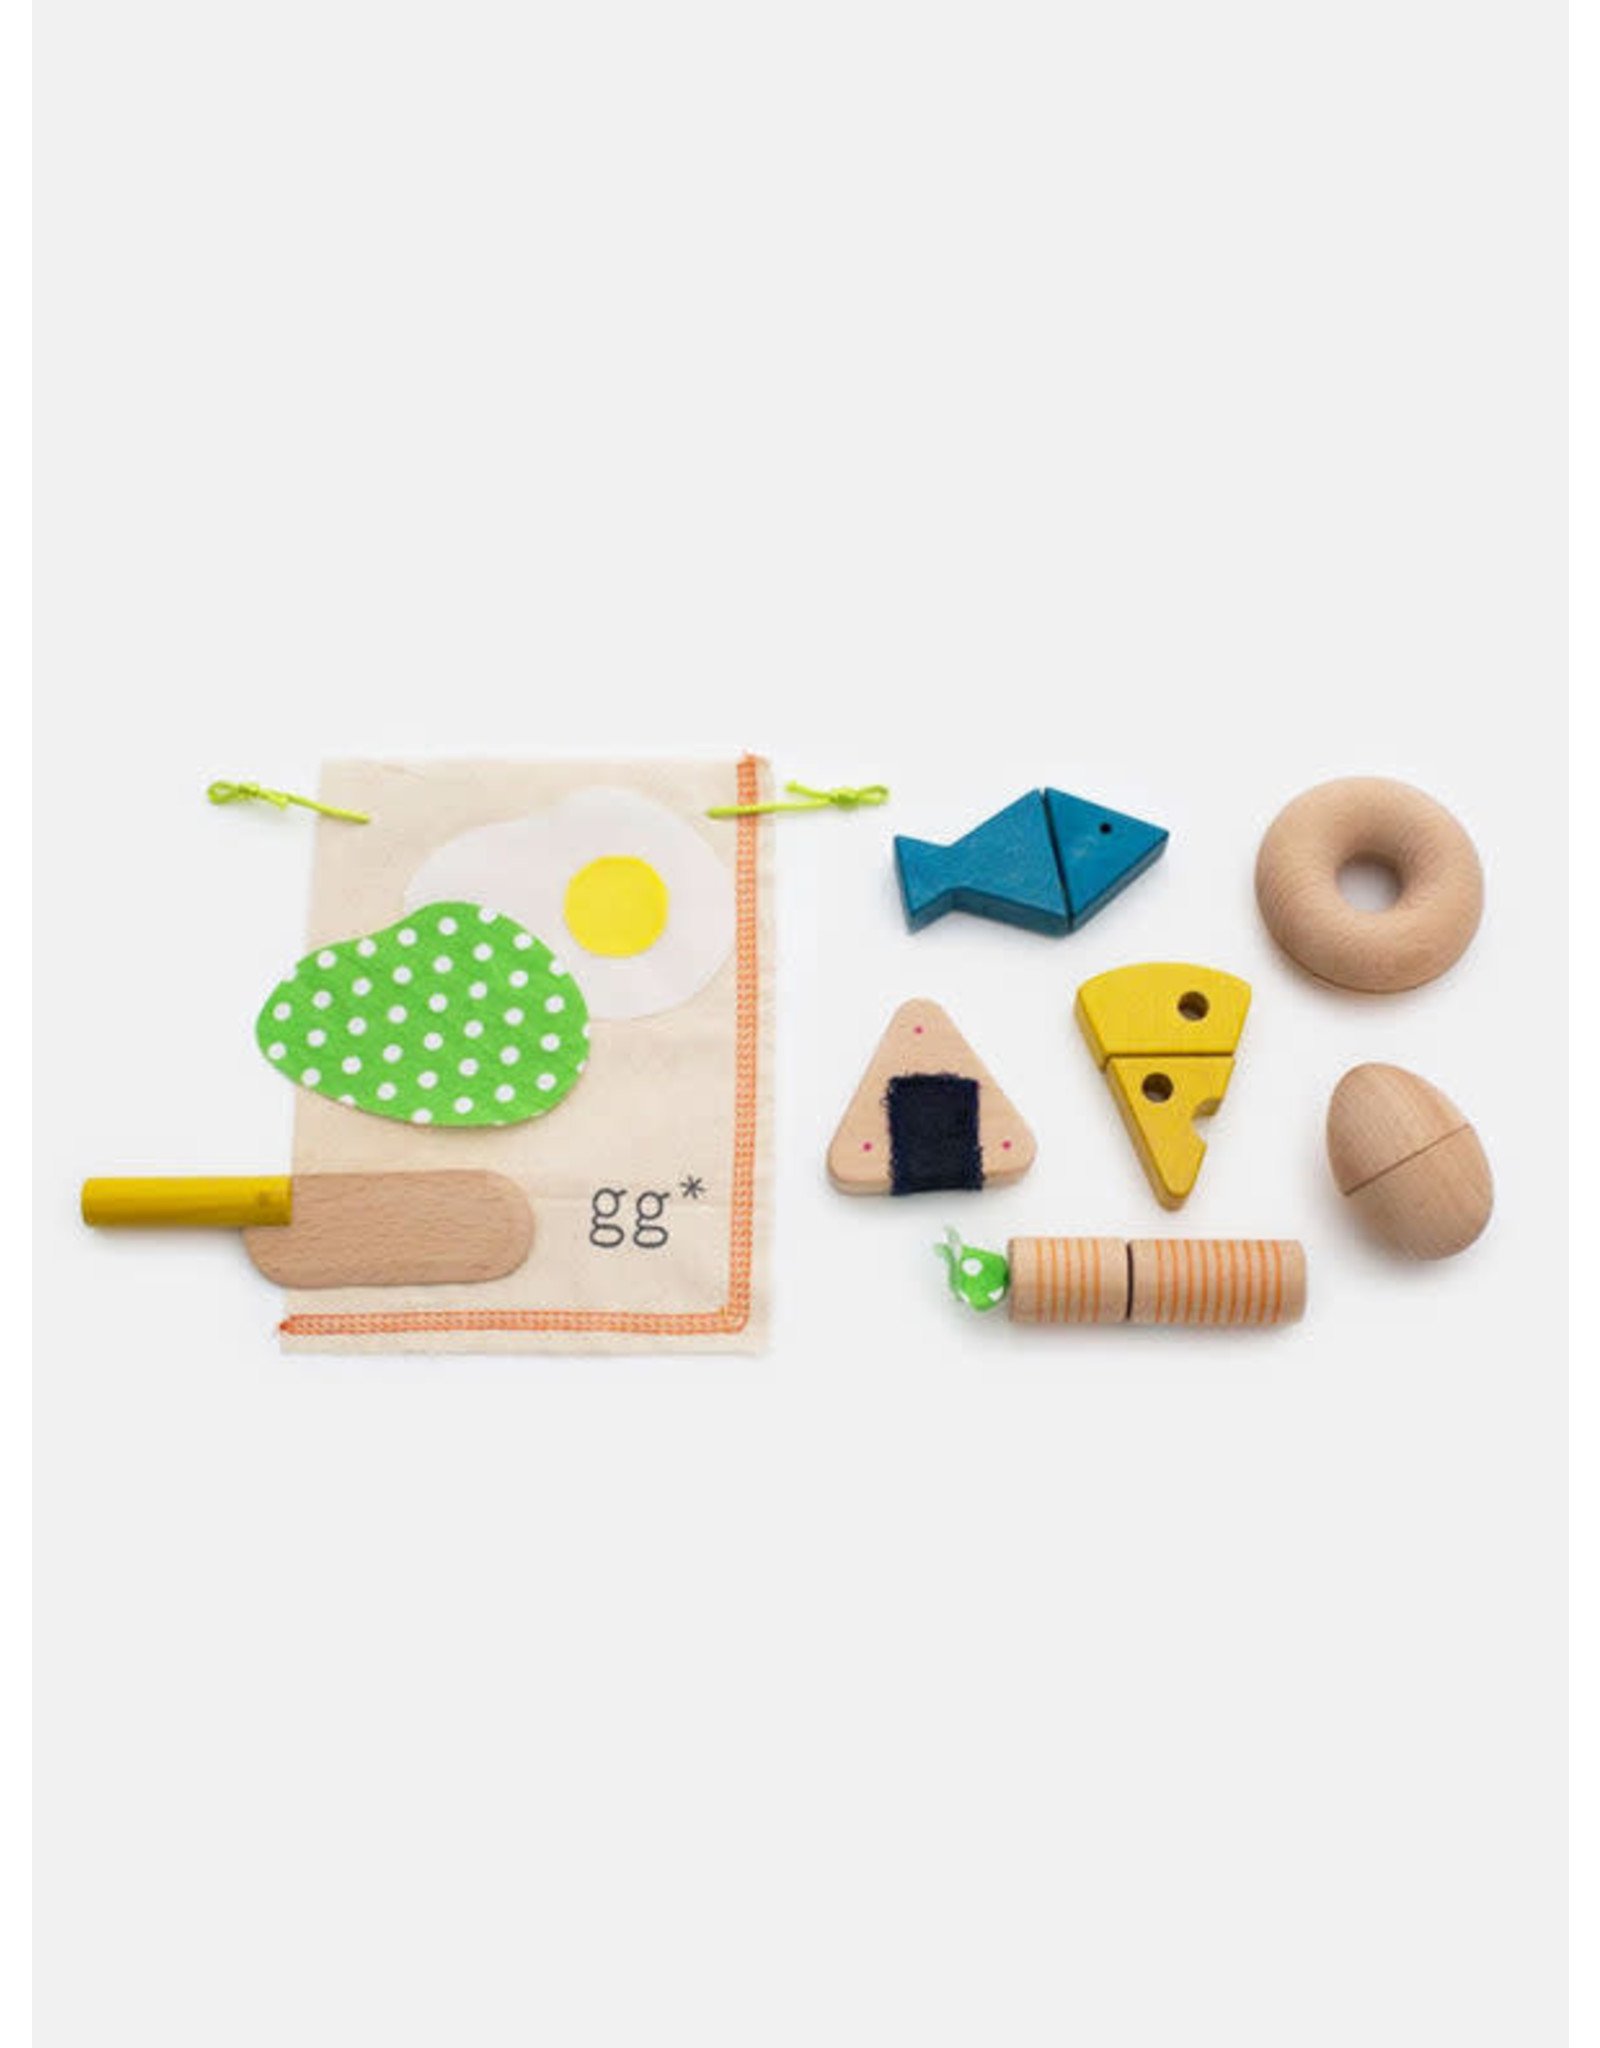 Make Your Own Bagel Wooden Kit